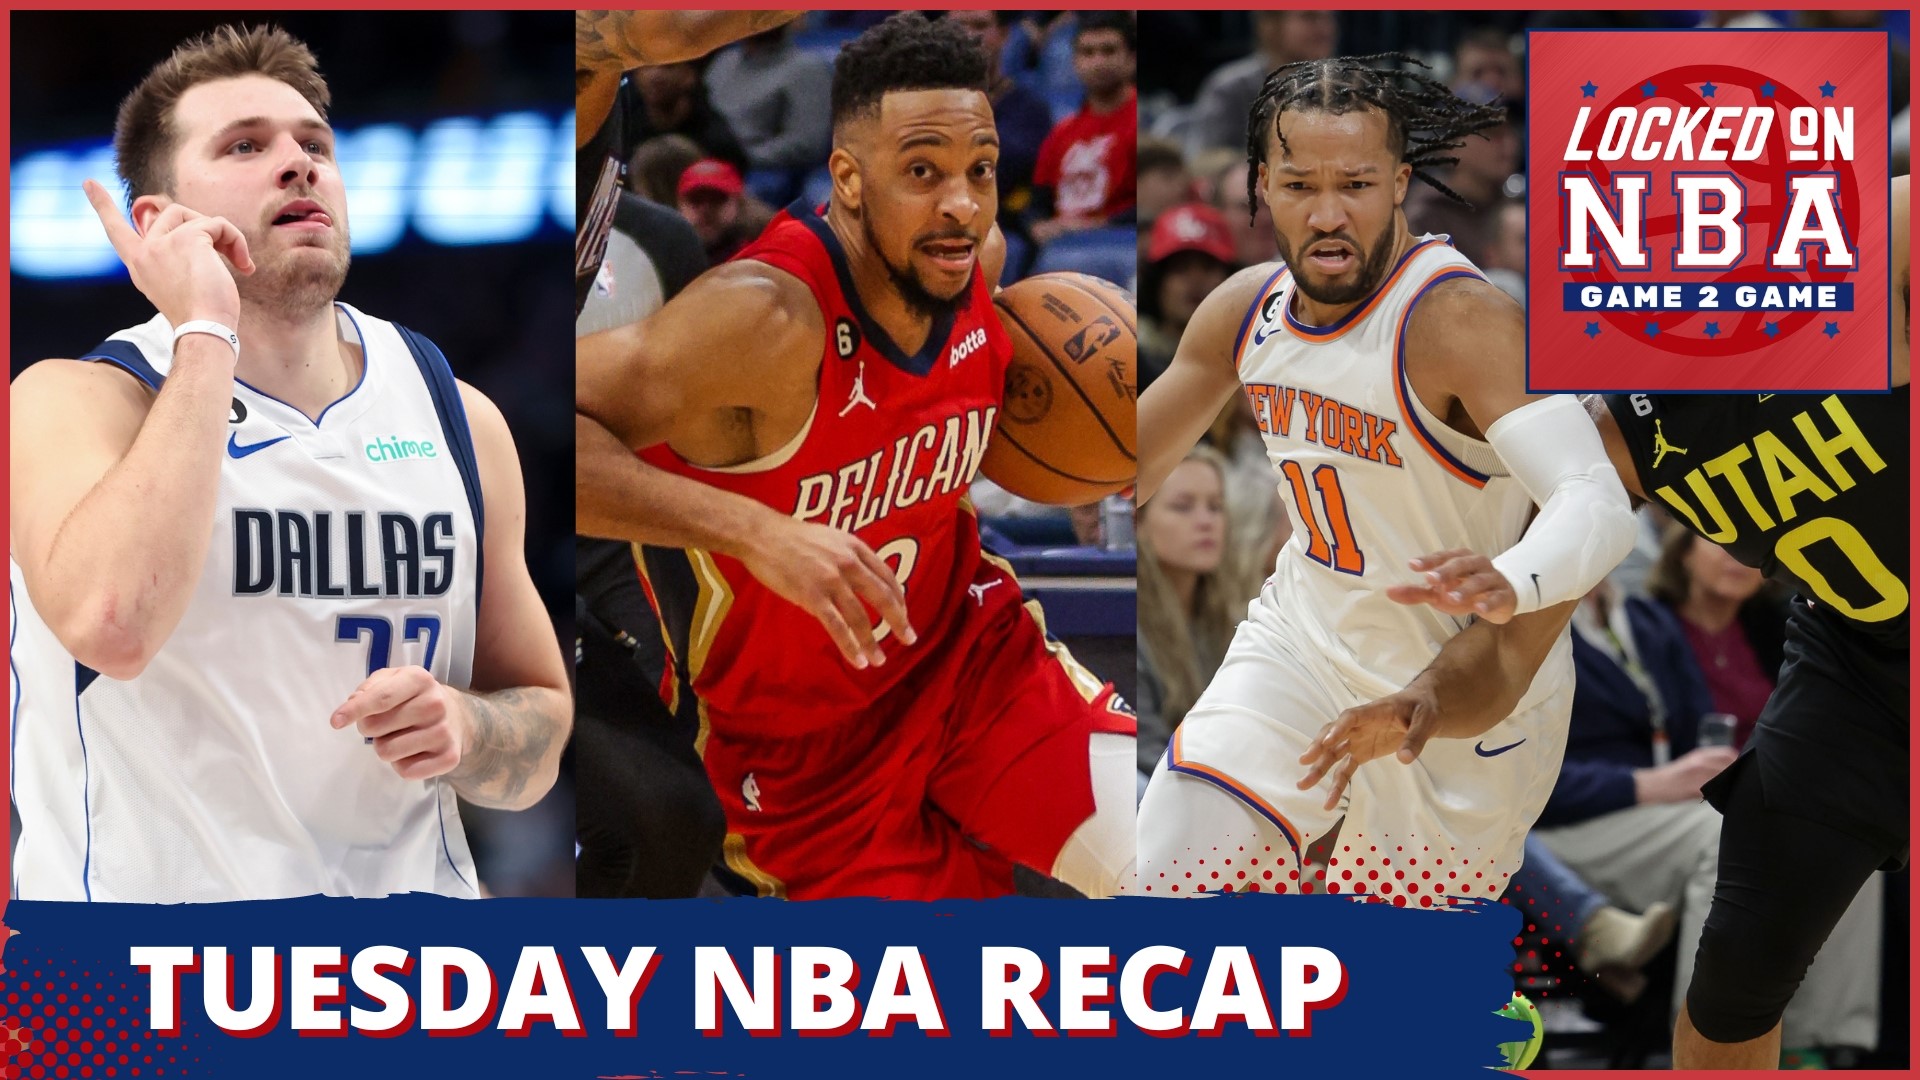 Breaking down the latest NBA games as the Utah Jazz come back down to Earth and the Pelicans survive the Grizzlies.